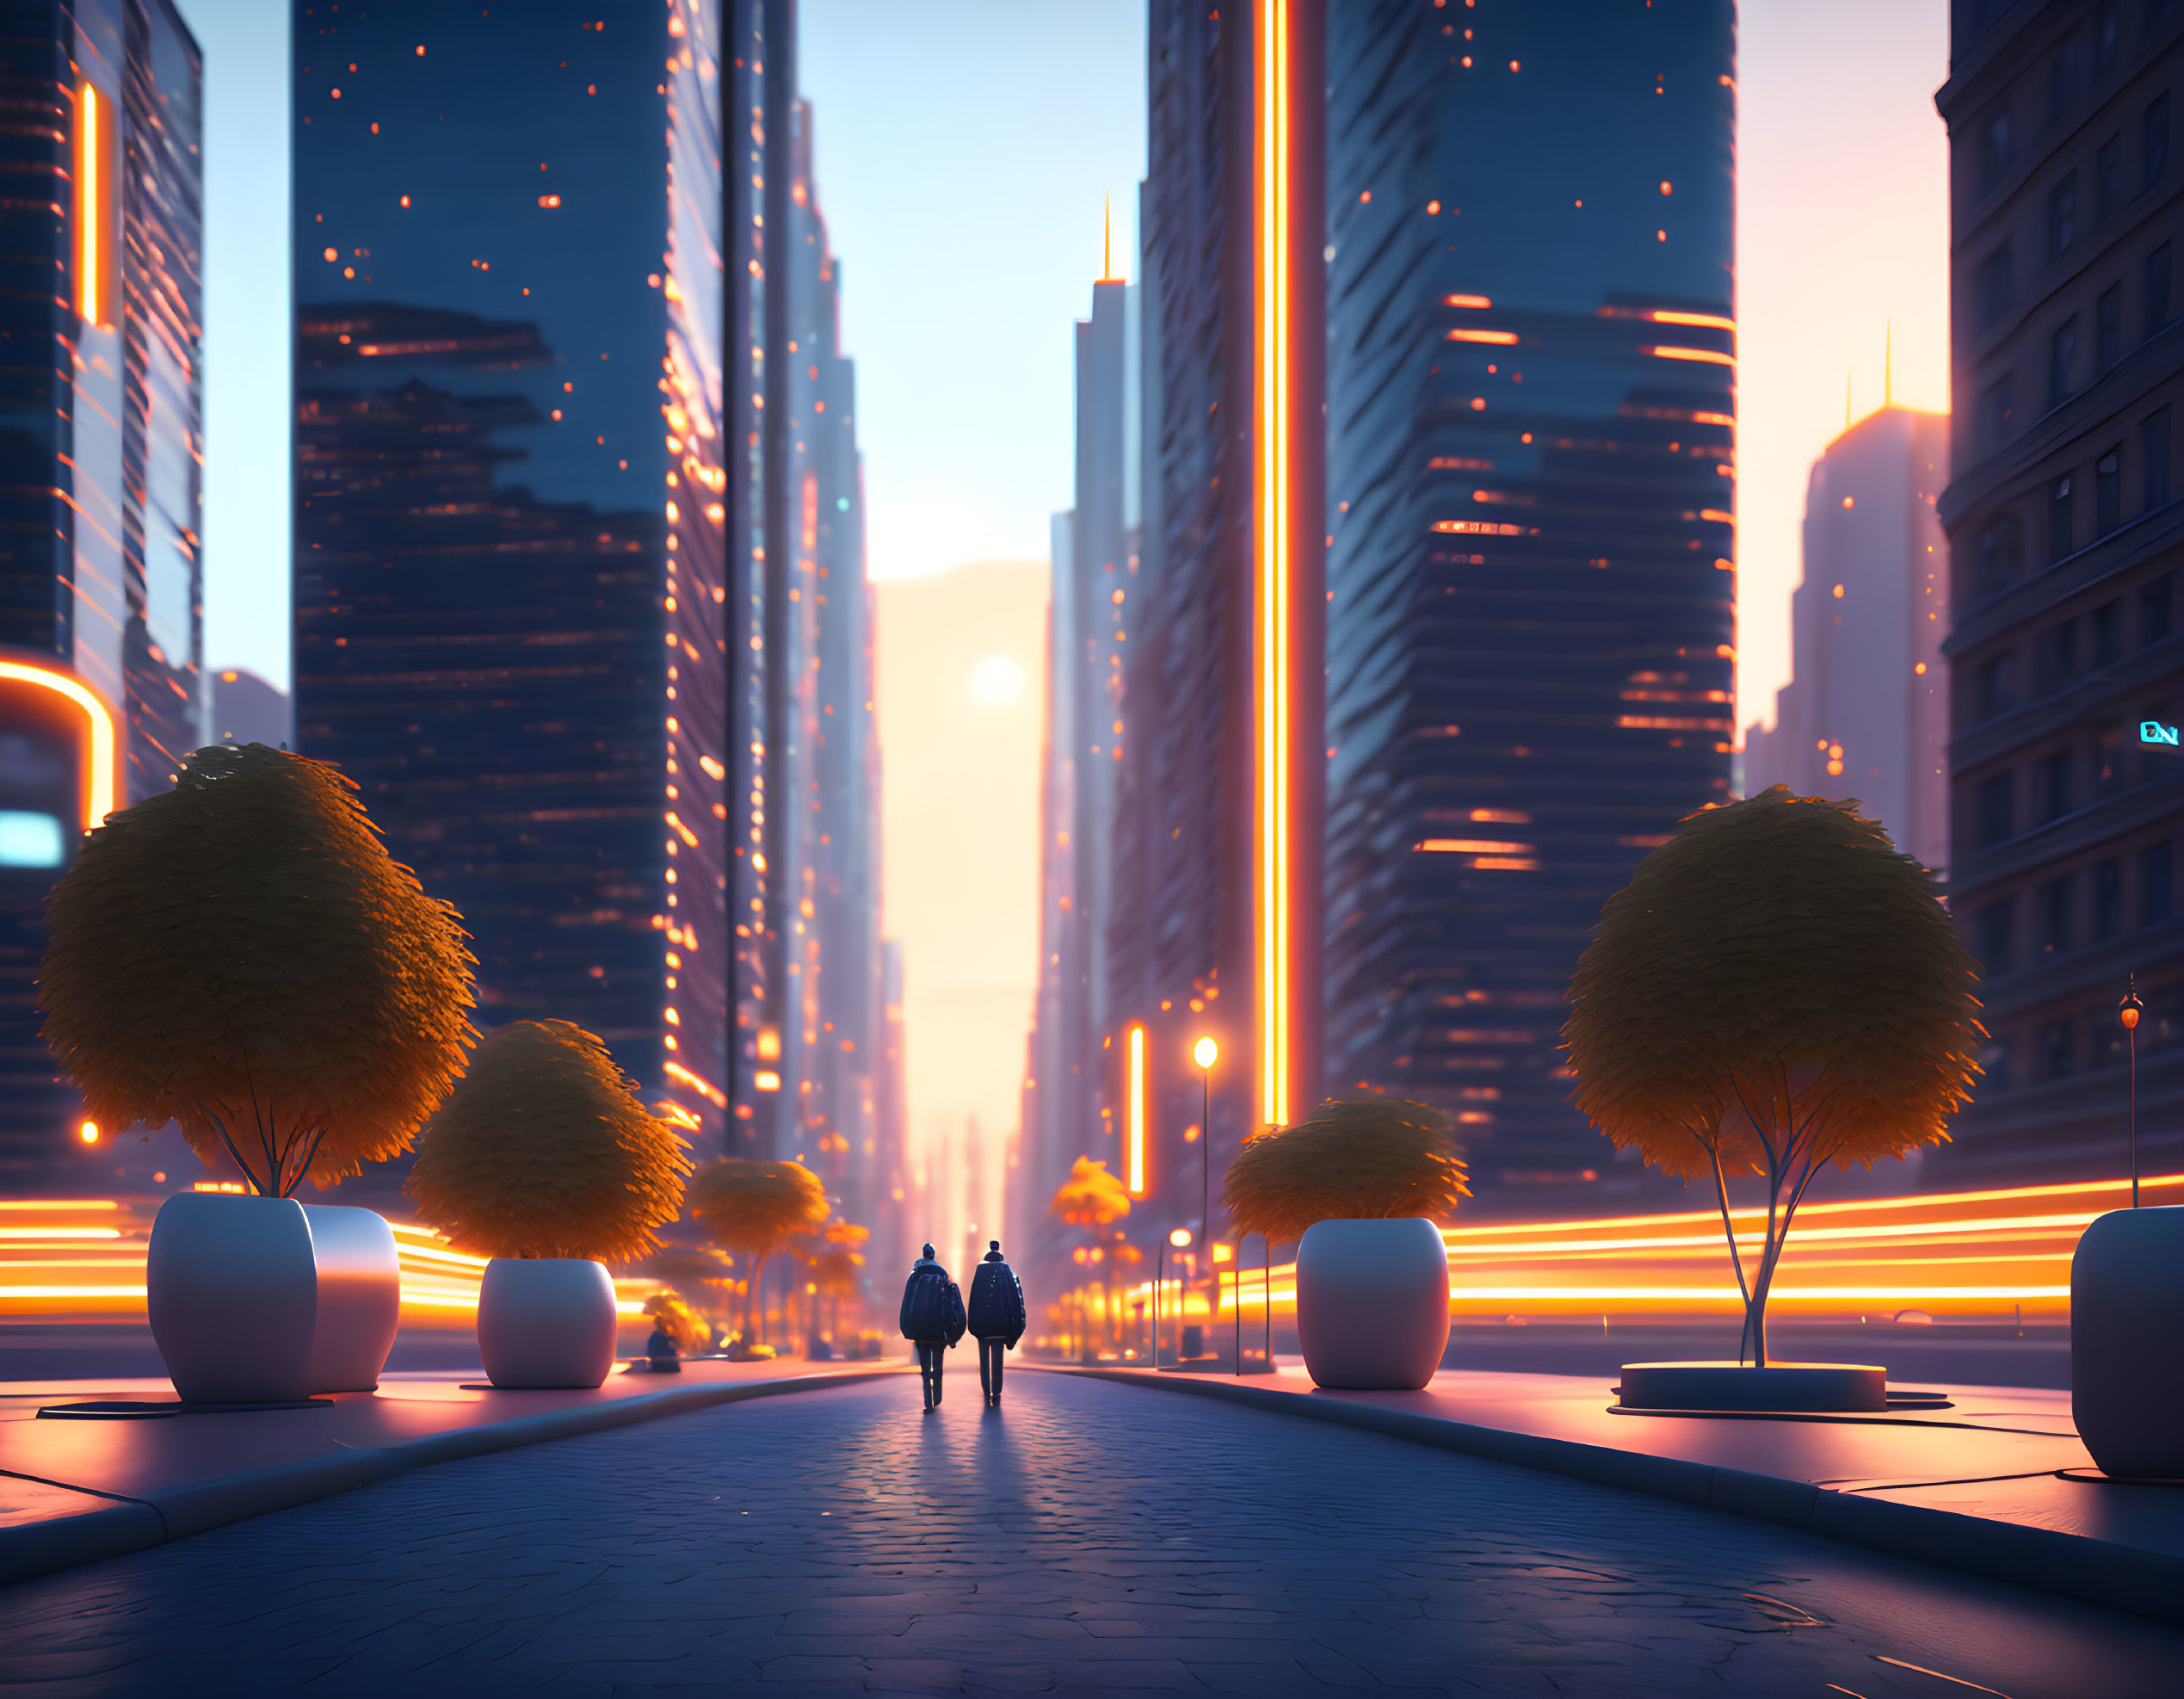 City street scene with two people walking towards a sunset amidst futuristic glowing lines and spherical trees.